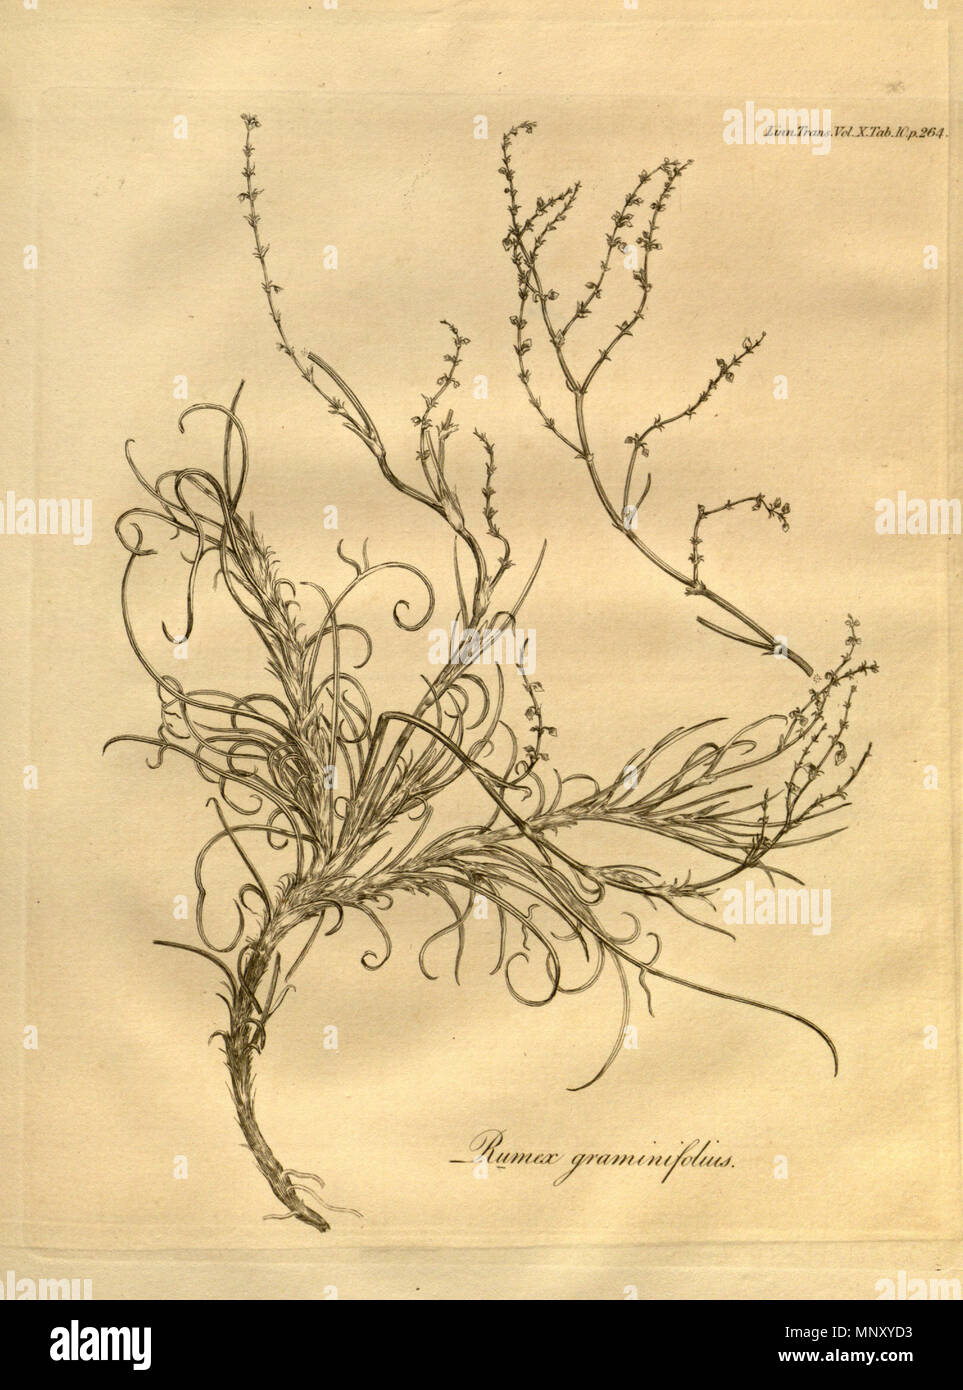 . Rumex graminifolius J.H. Rudolphi ex Lamb. on a page from Volume X of Transactions of the Linnean Society of London, published in 1811. 1811. Various 1203 Transactions of the Linnean Society of London, Volume 10 - tab. 10-original Stock Photo